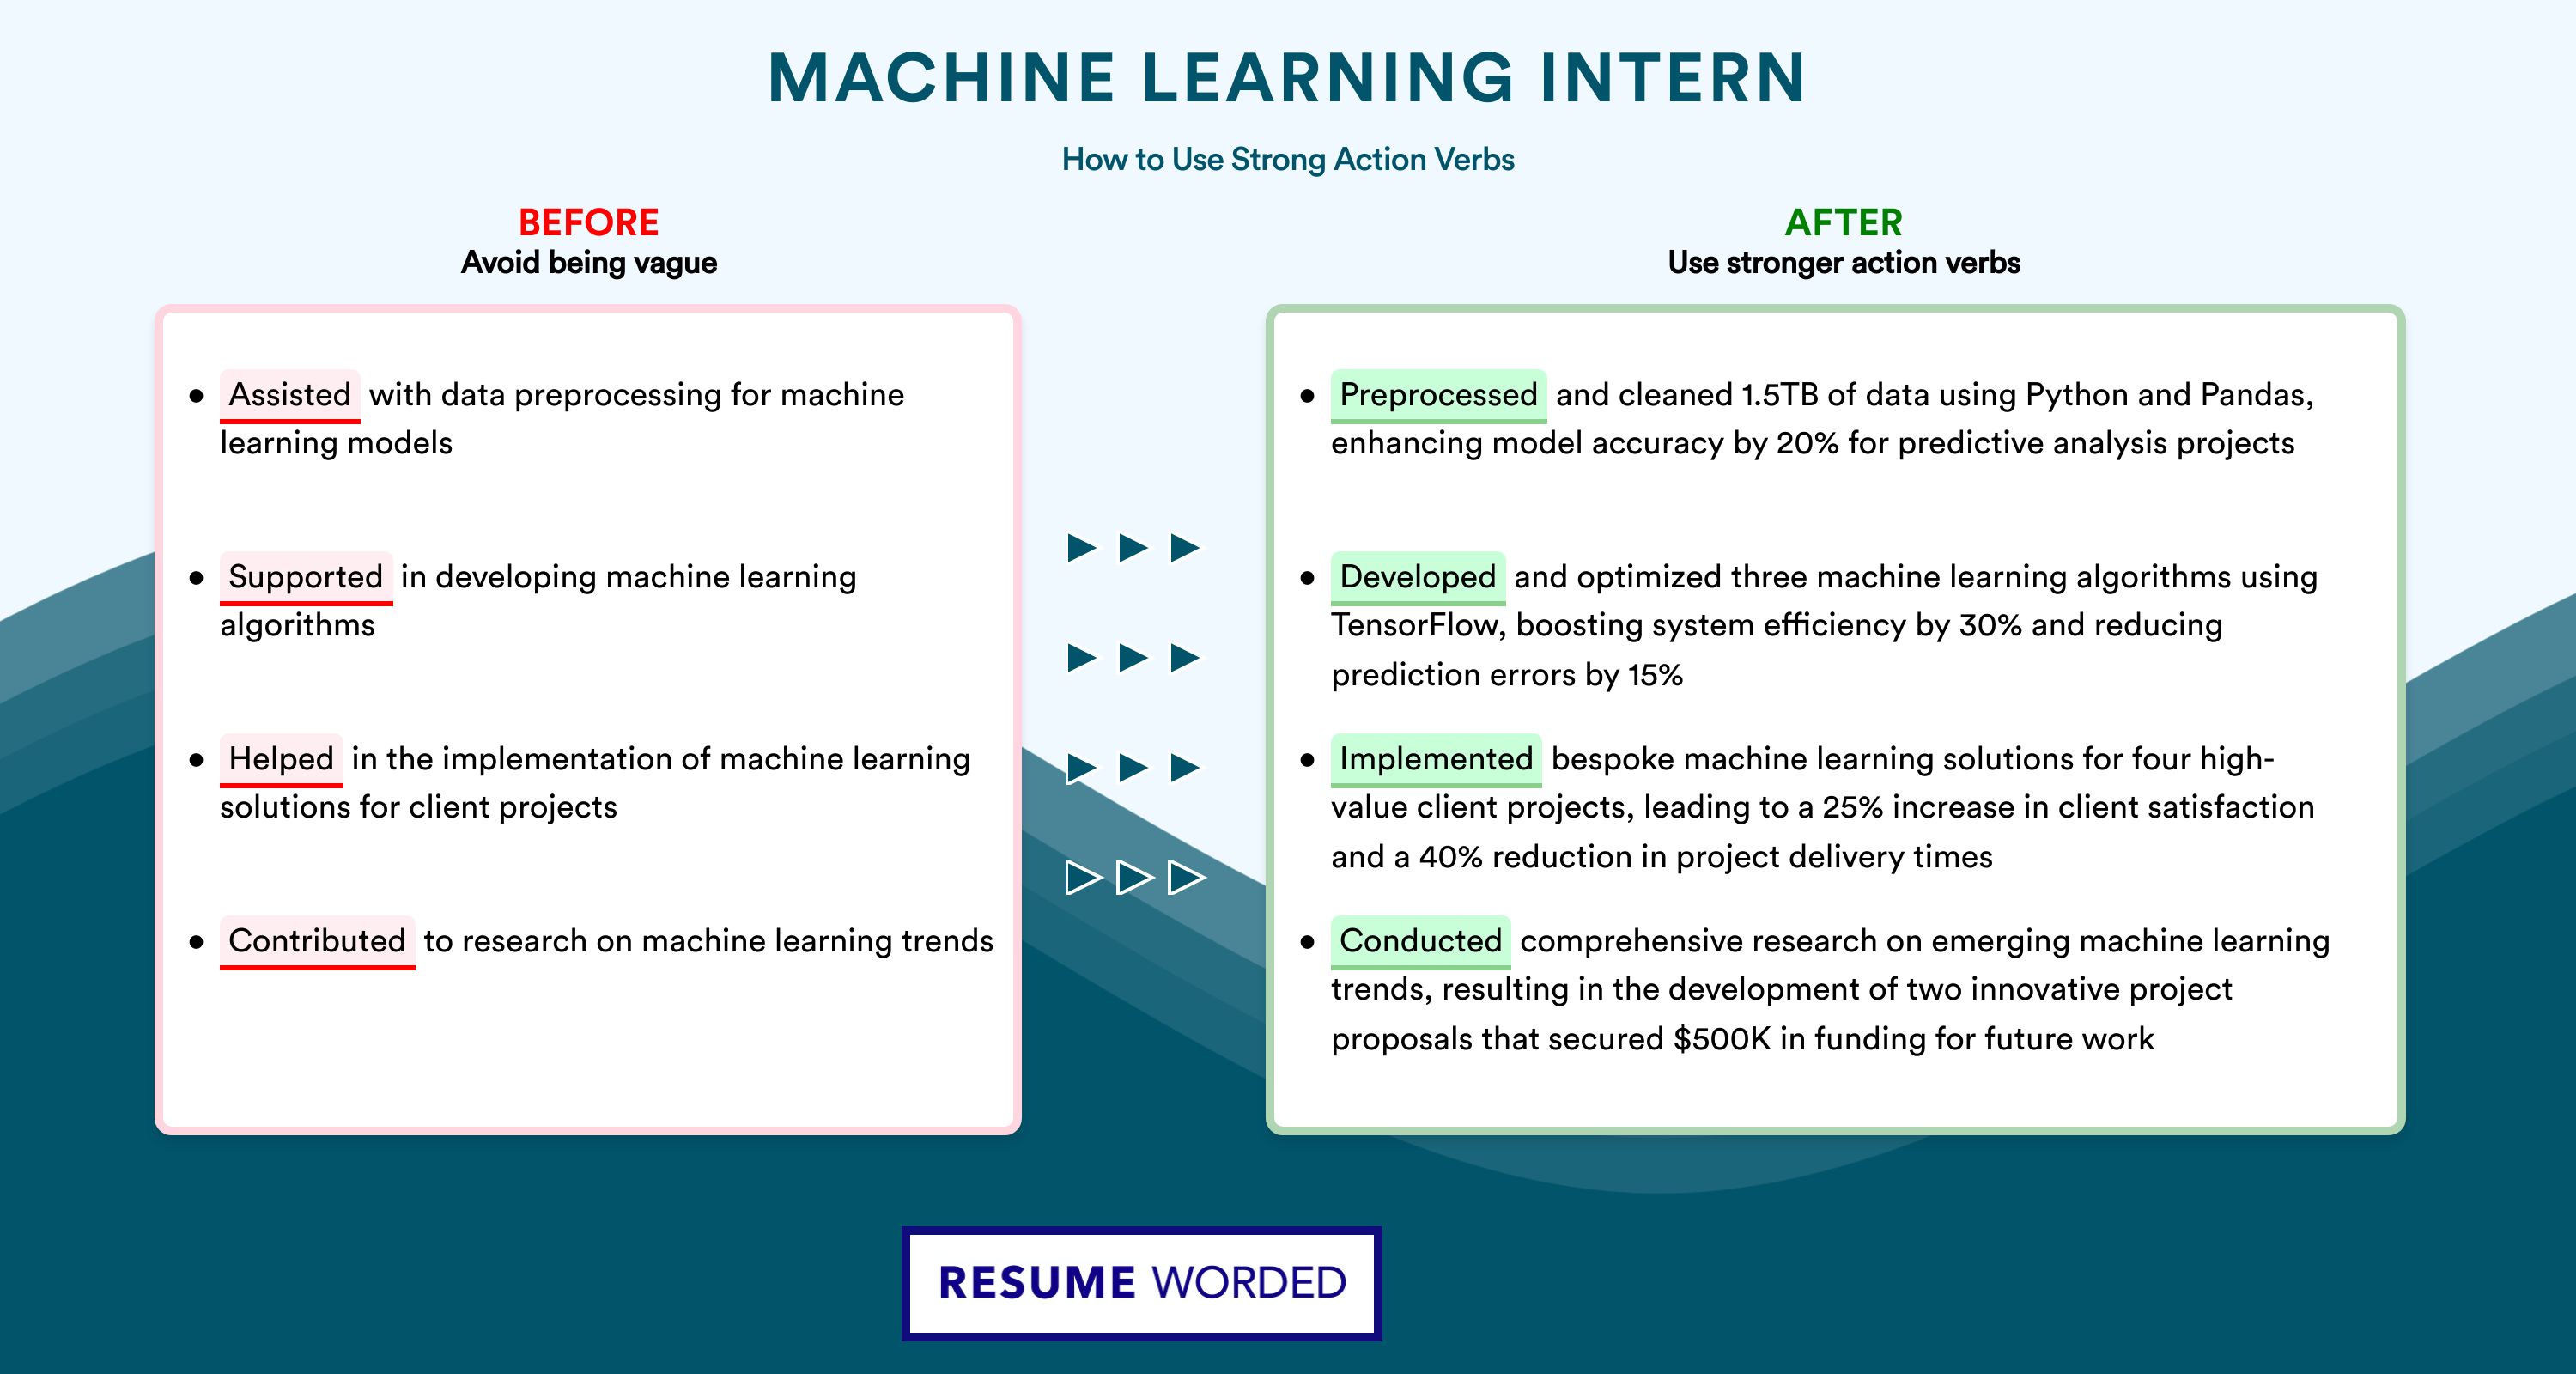 Action Verbs for Machine Learning Intern